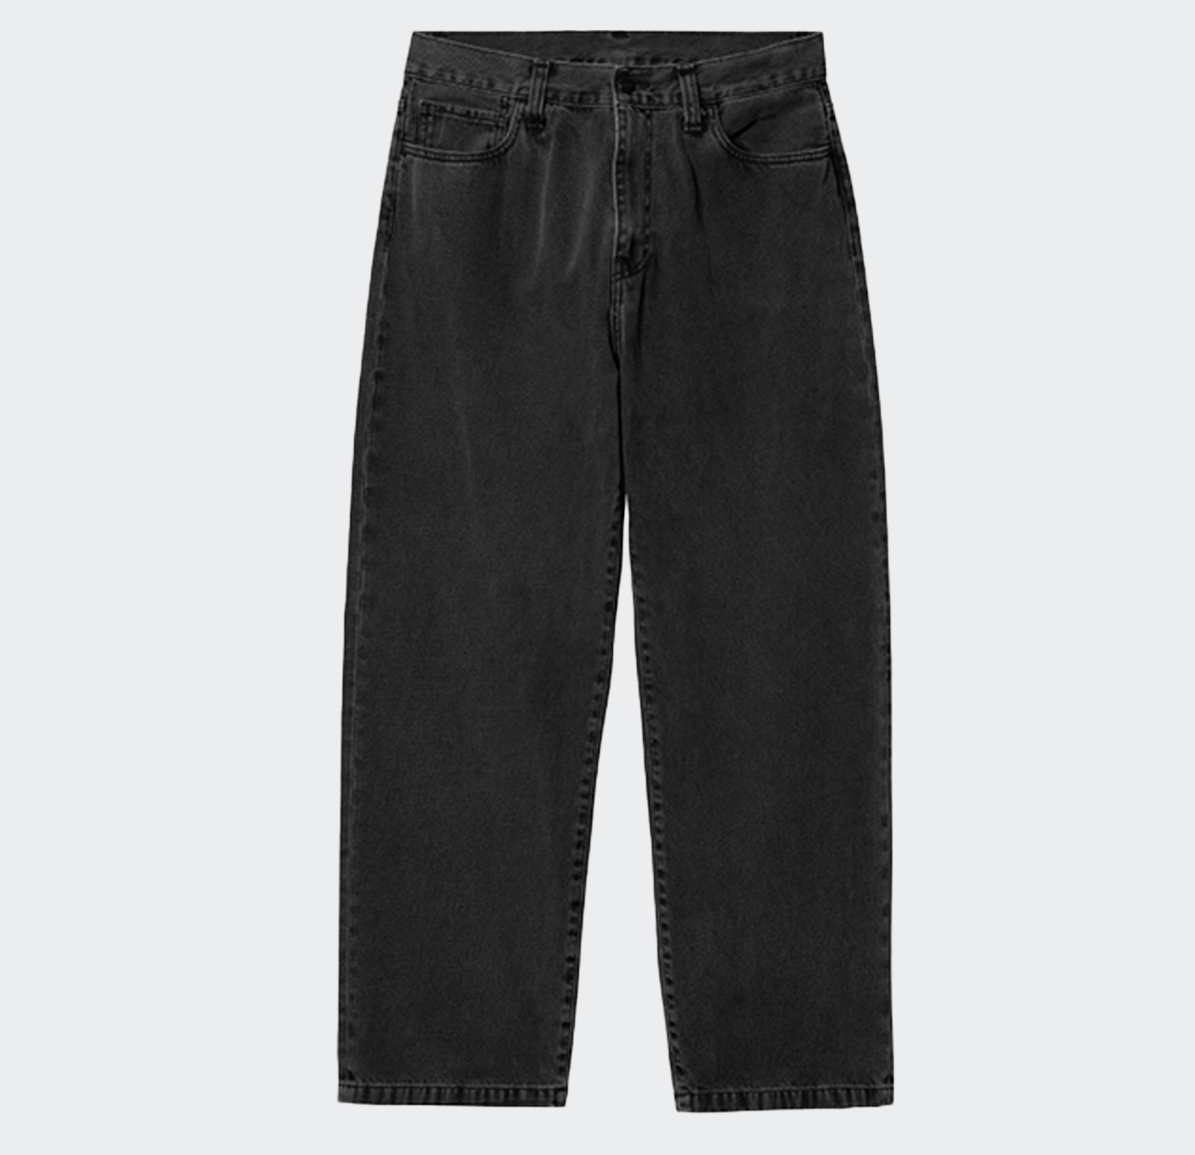 Carhartt WIP Landon Pant - Black Stone Washed - Carhartt WIP - State Of Play